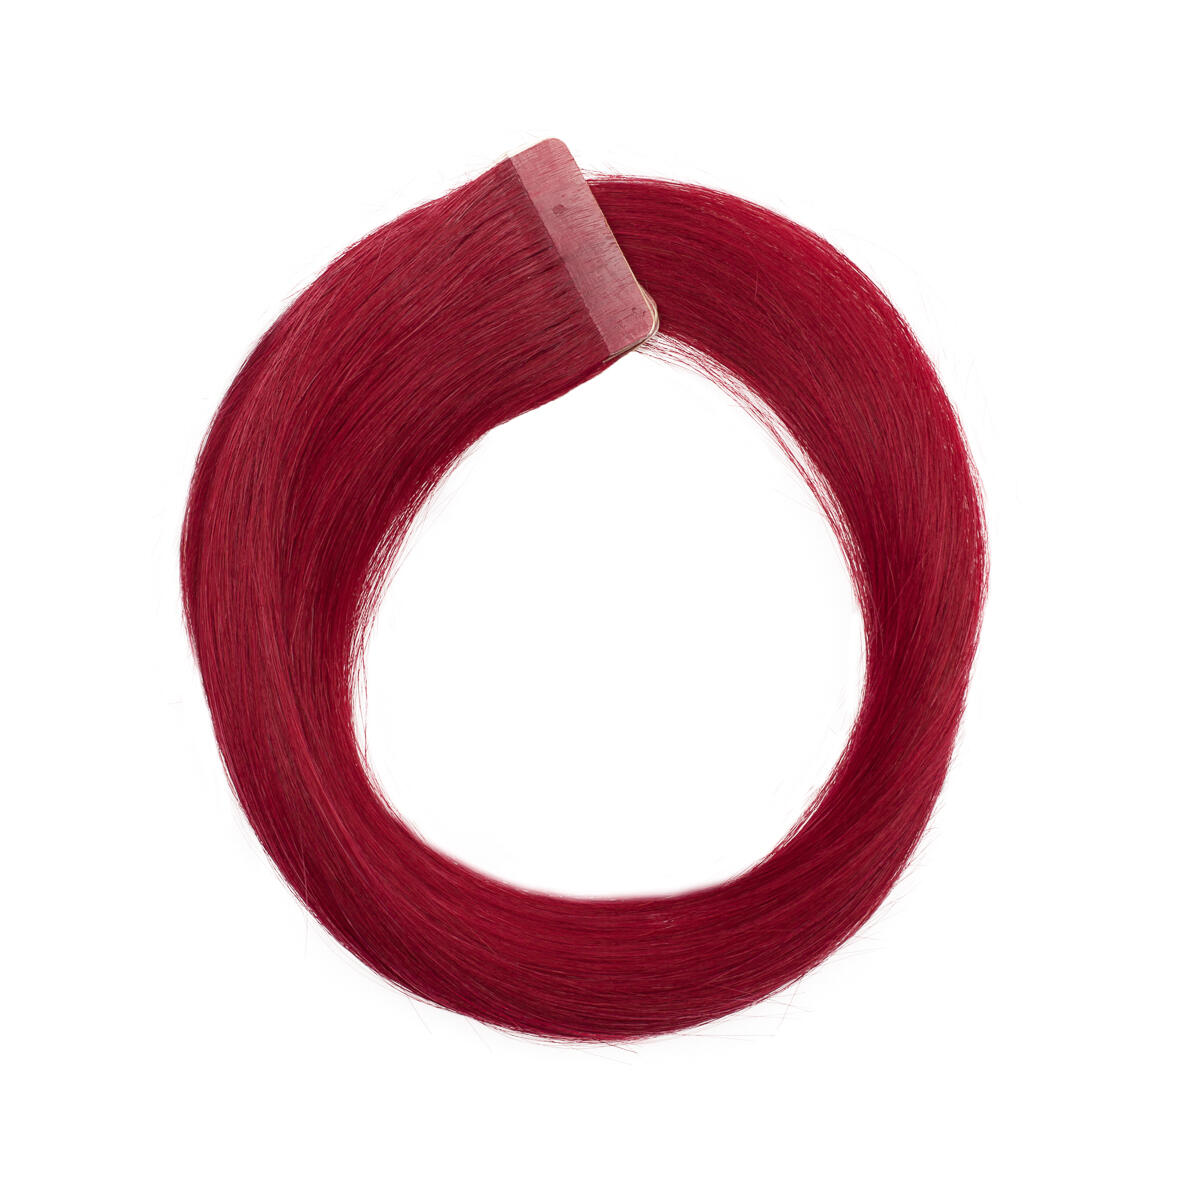 Basic Tape Extensions Classic 4 6.9 Rubin Red 40 cm